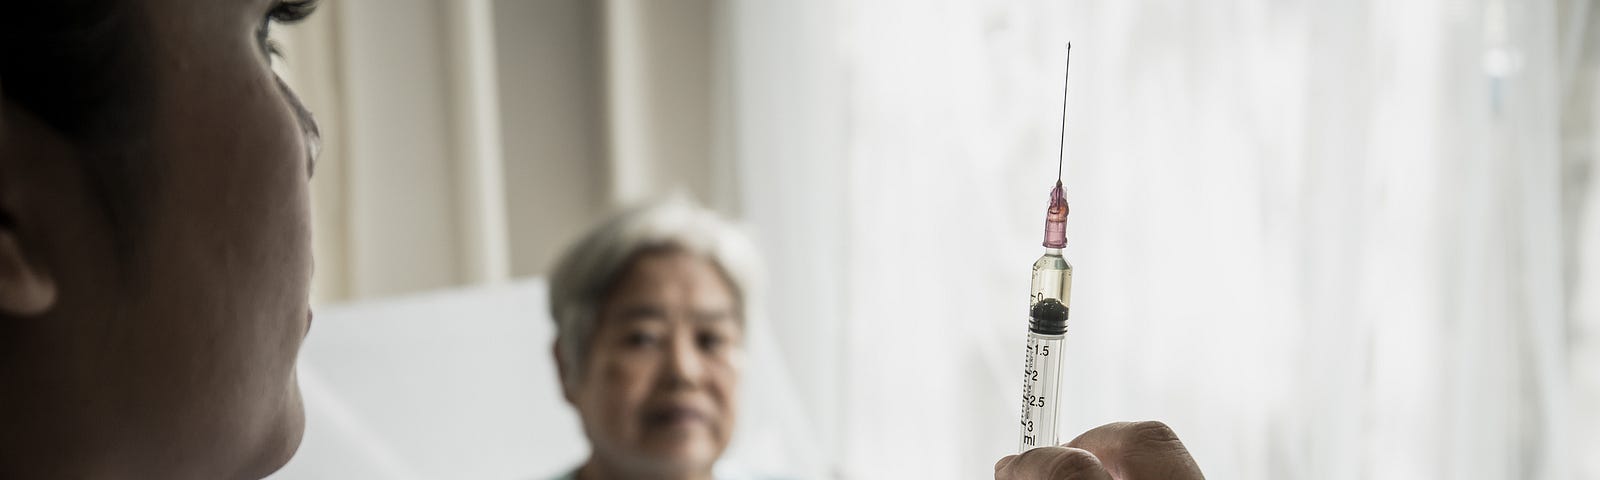 A photo of a nurse holding up a syringe with an elderly woman sitting in a hospital bed in the background.